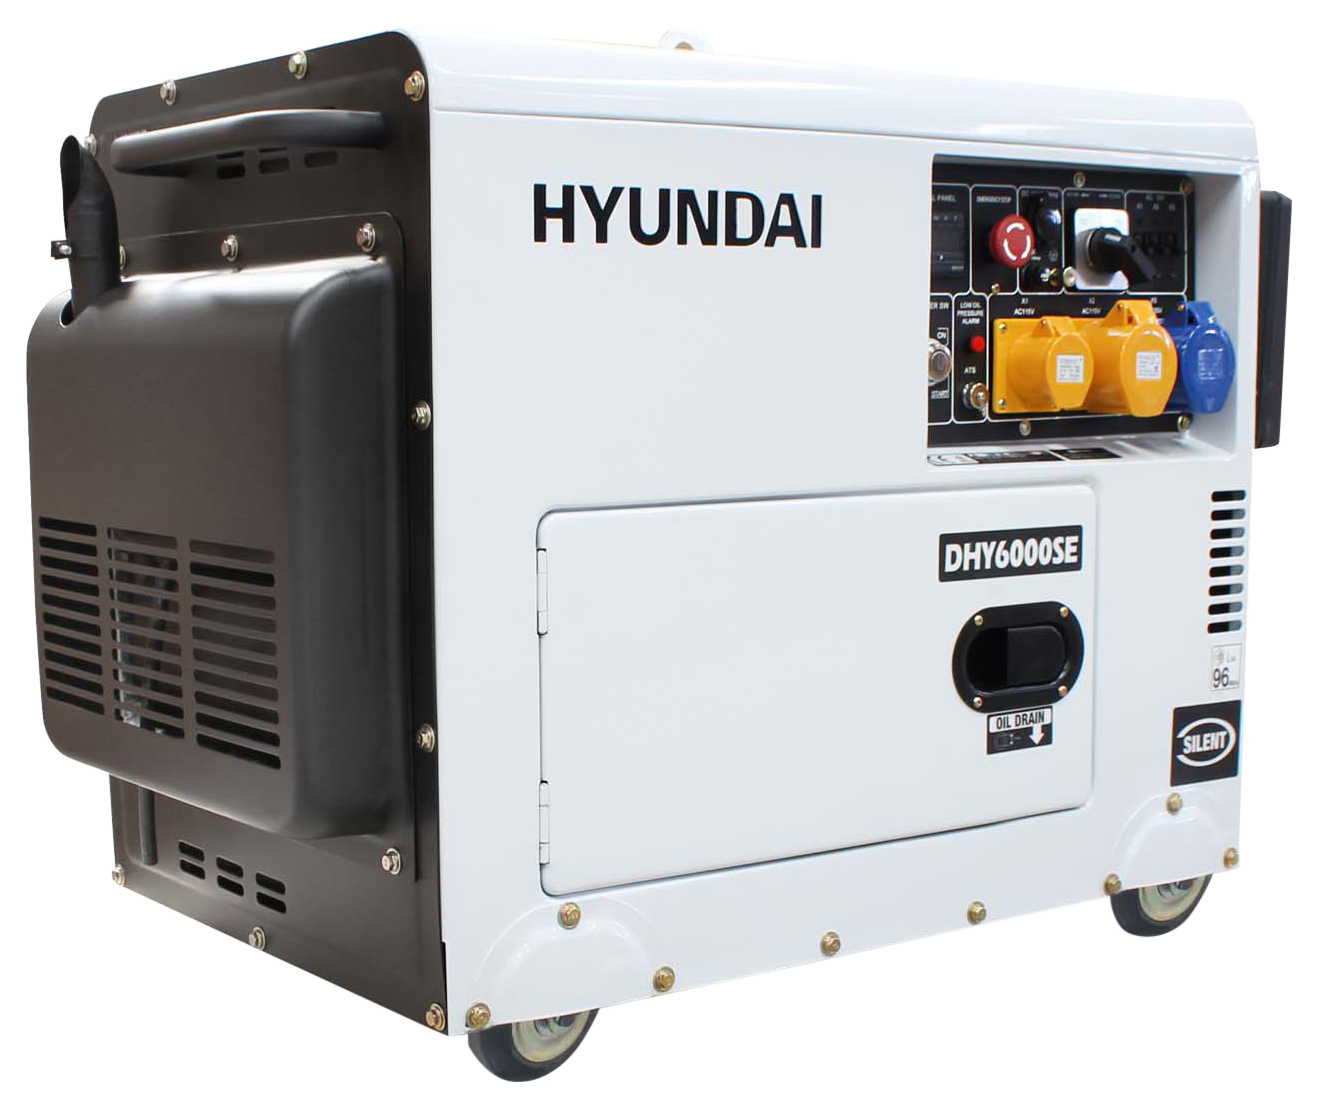 Image of Hyundai DHY6000SE 5.2kW 115V/230V Silenced Air Cooled Diesel Generator - 5200W